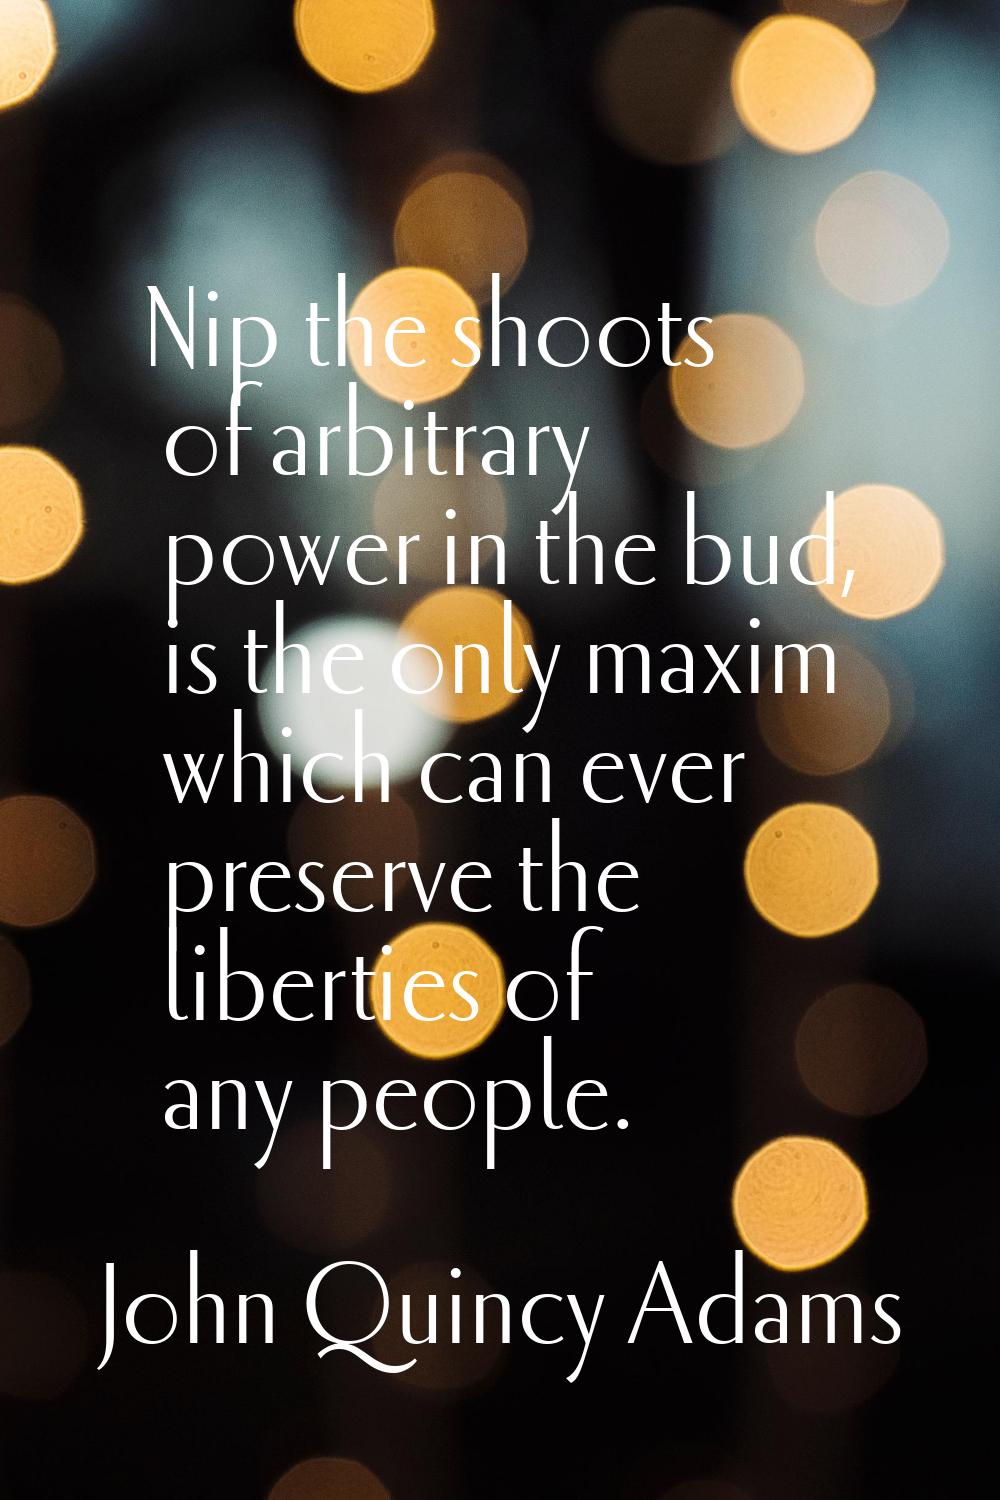 Nip the shoots of arbitrary power in the bud, is the only maxim which can ever preserve the liberti